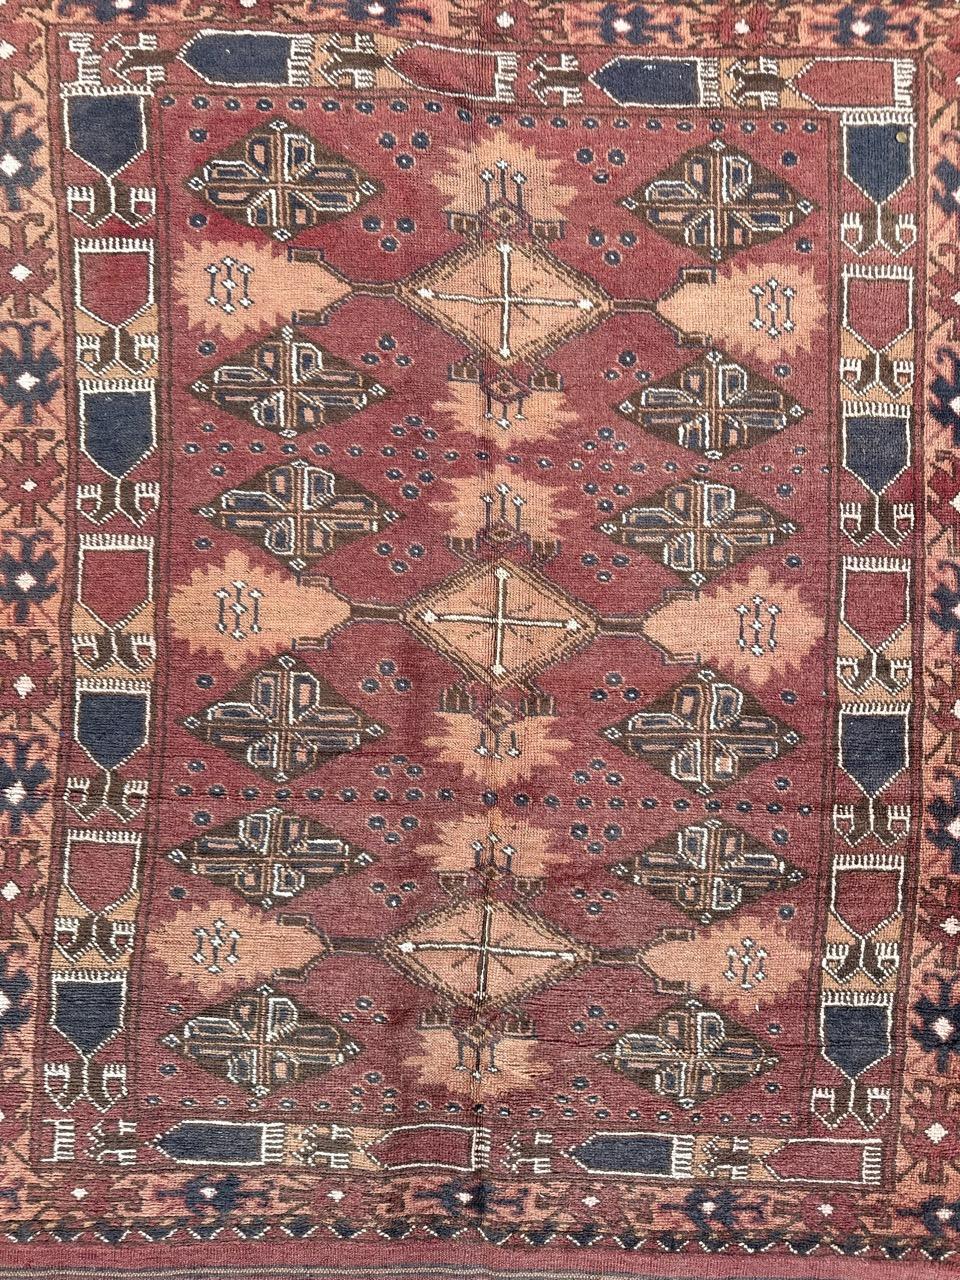 Pretty late 20th century Turkmen Afghan rug with beautiful decorative design and nice colours with a red brown field, orange and grey, entirely and finely hand knotted by wool on wool foundation with a soft texture.

✨✨✨
